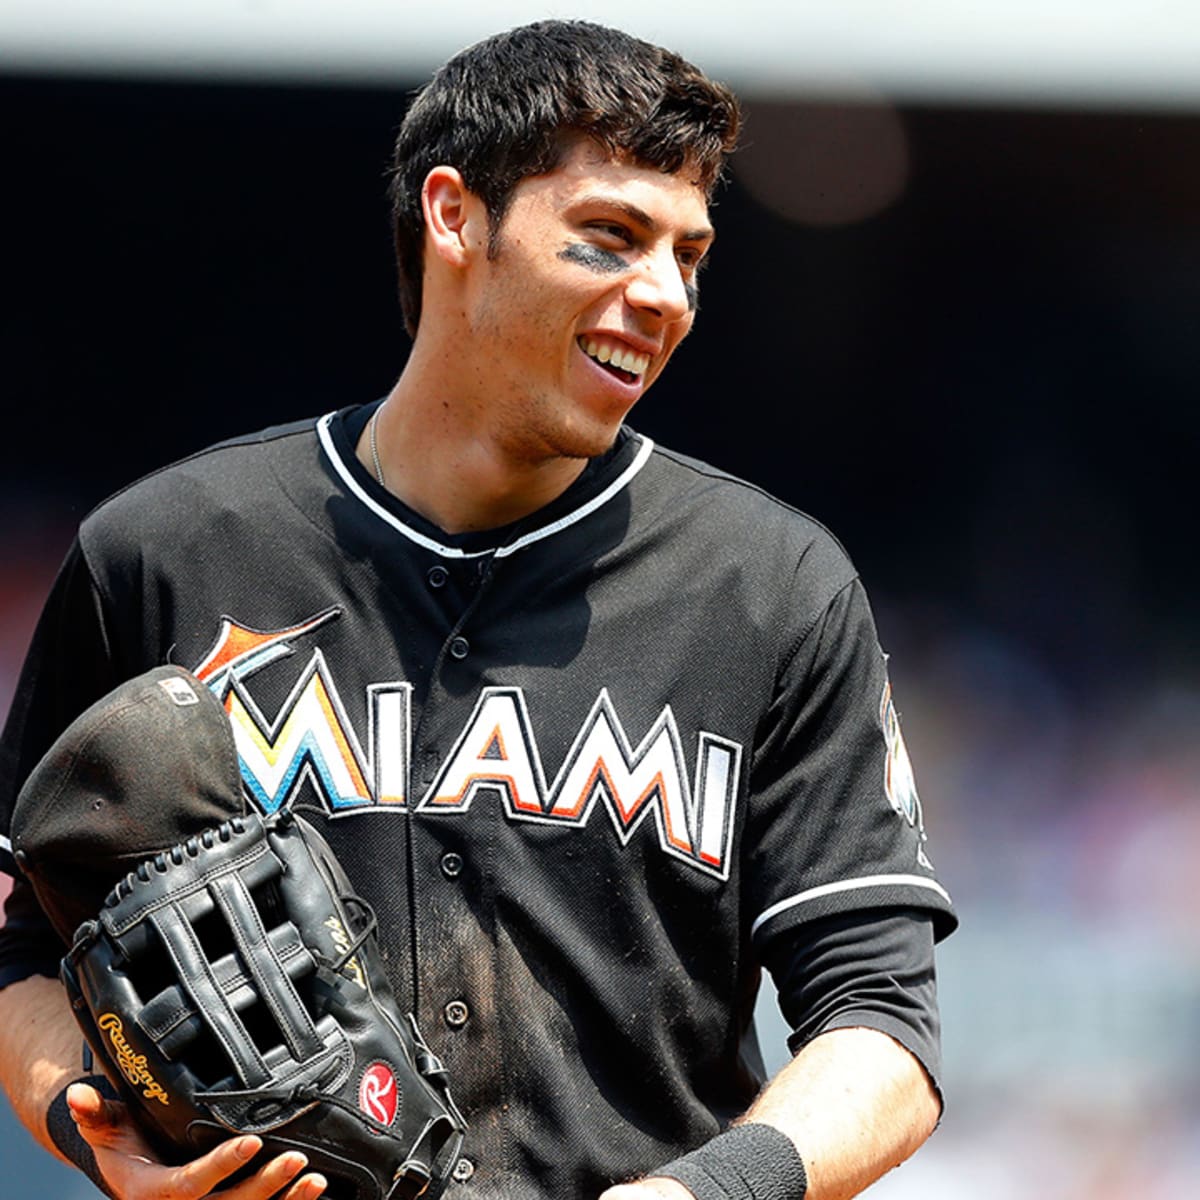 Brewers Acquire Marlins' Christian Yelich